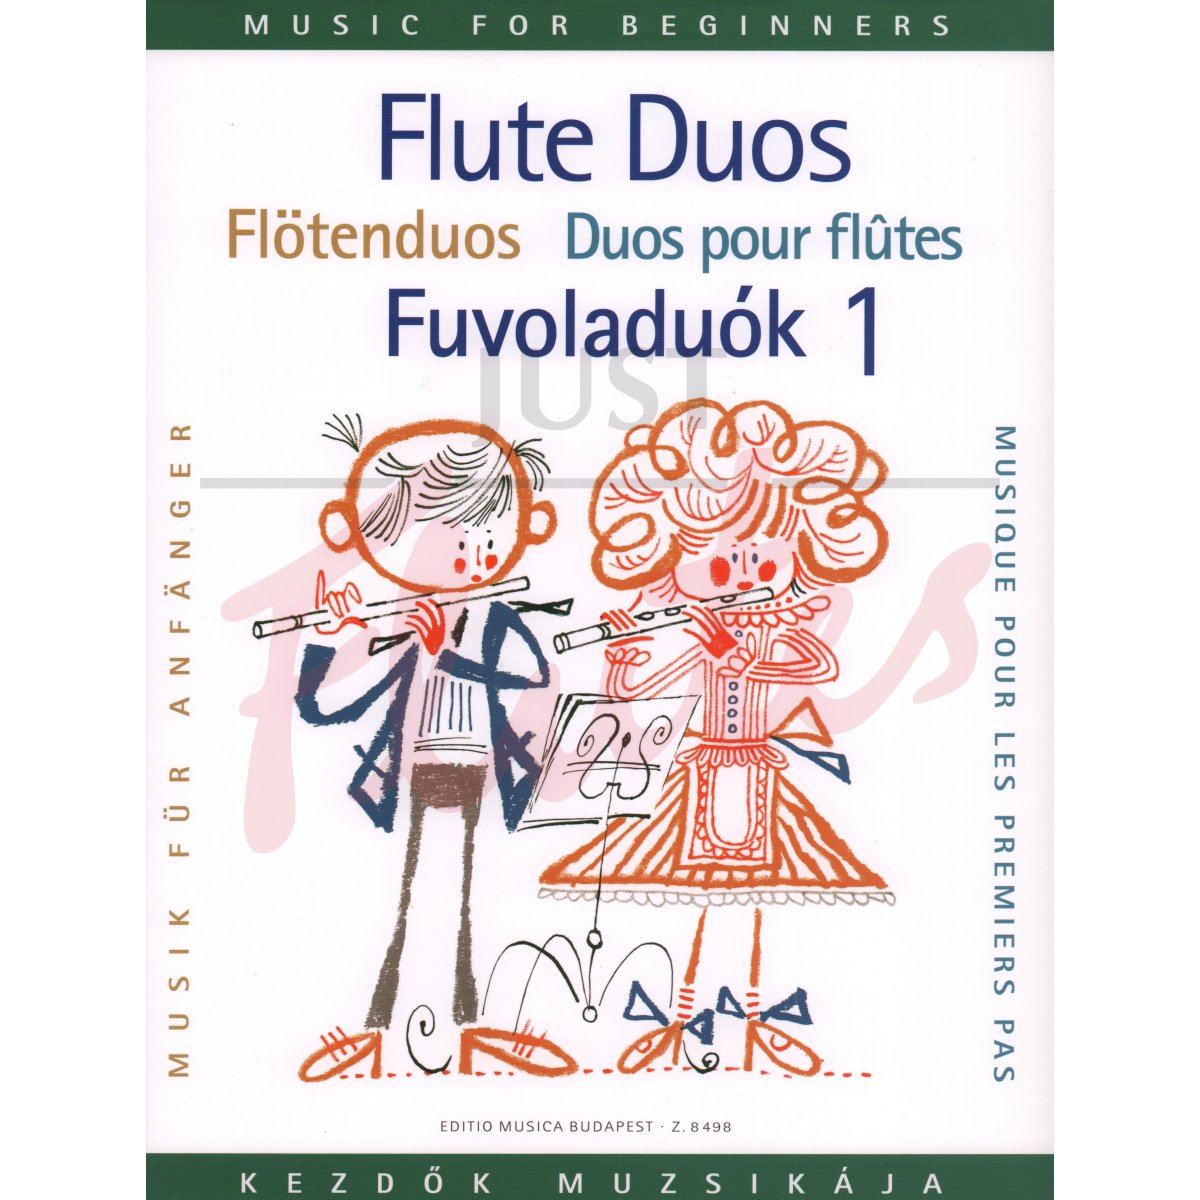 Flute Duos for Beginners